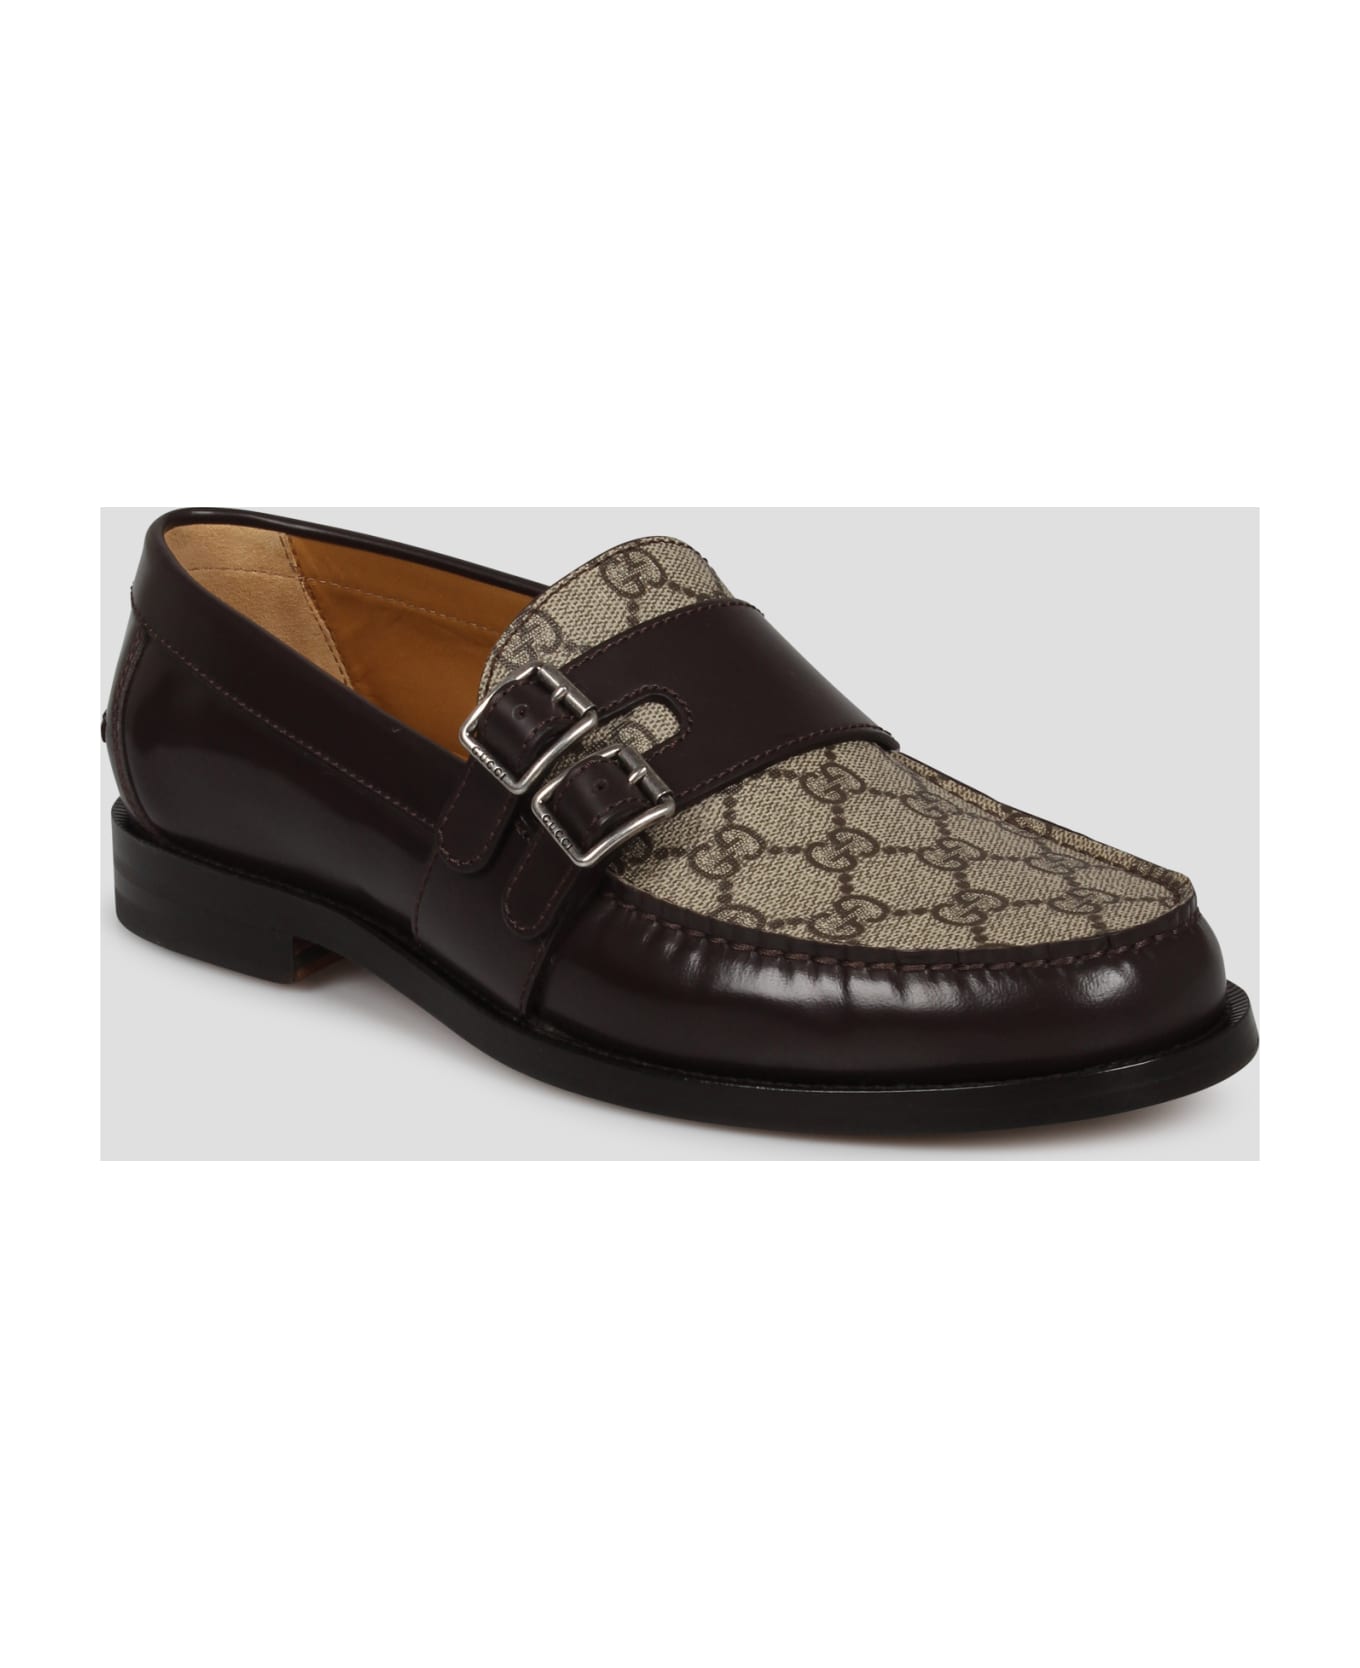 Gucci Gg Buckle Loafers - Brown